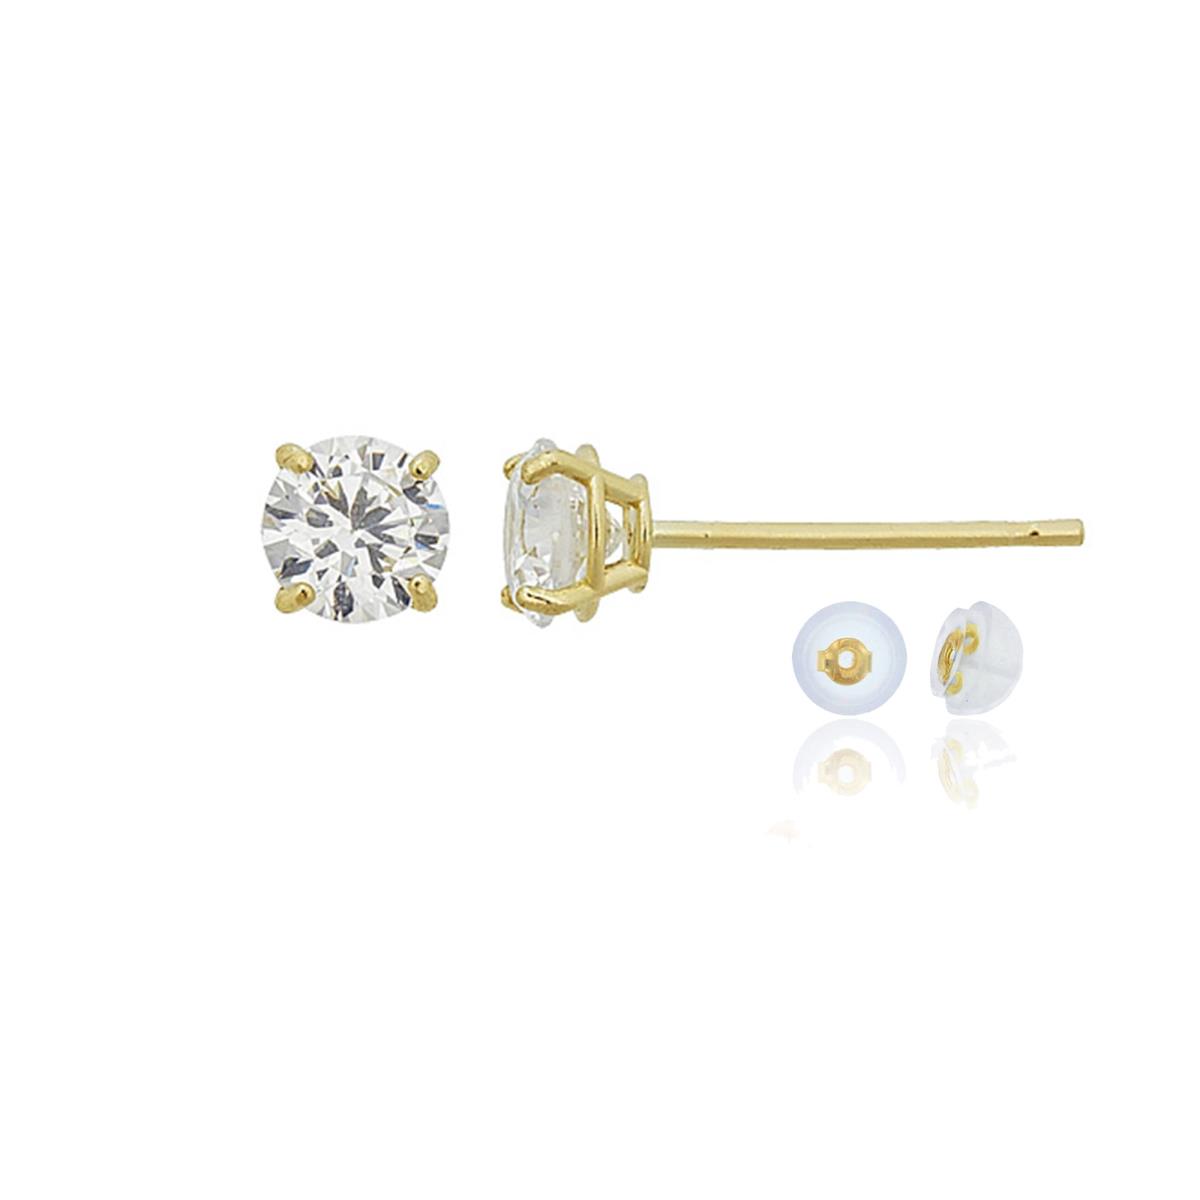 10K Yellow Gold 5mm Rd White Swarovski Zirconia 4-Prong Cast Basket Solitaire Earring & Silicone Bubble Back